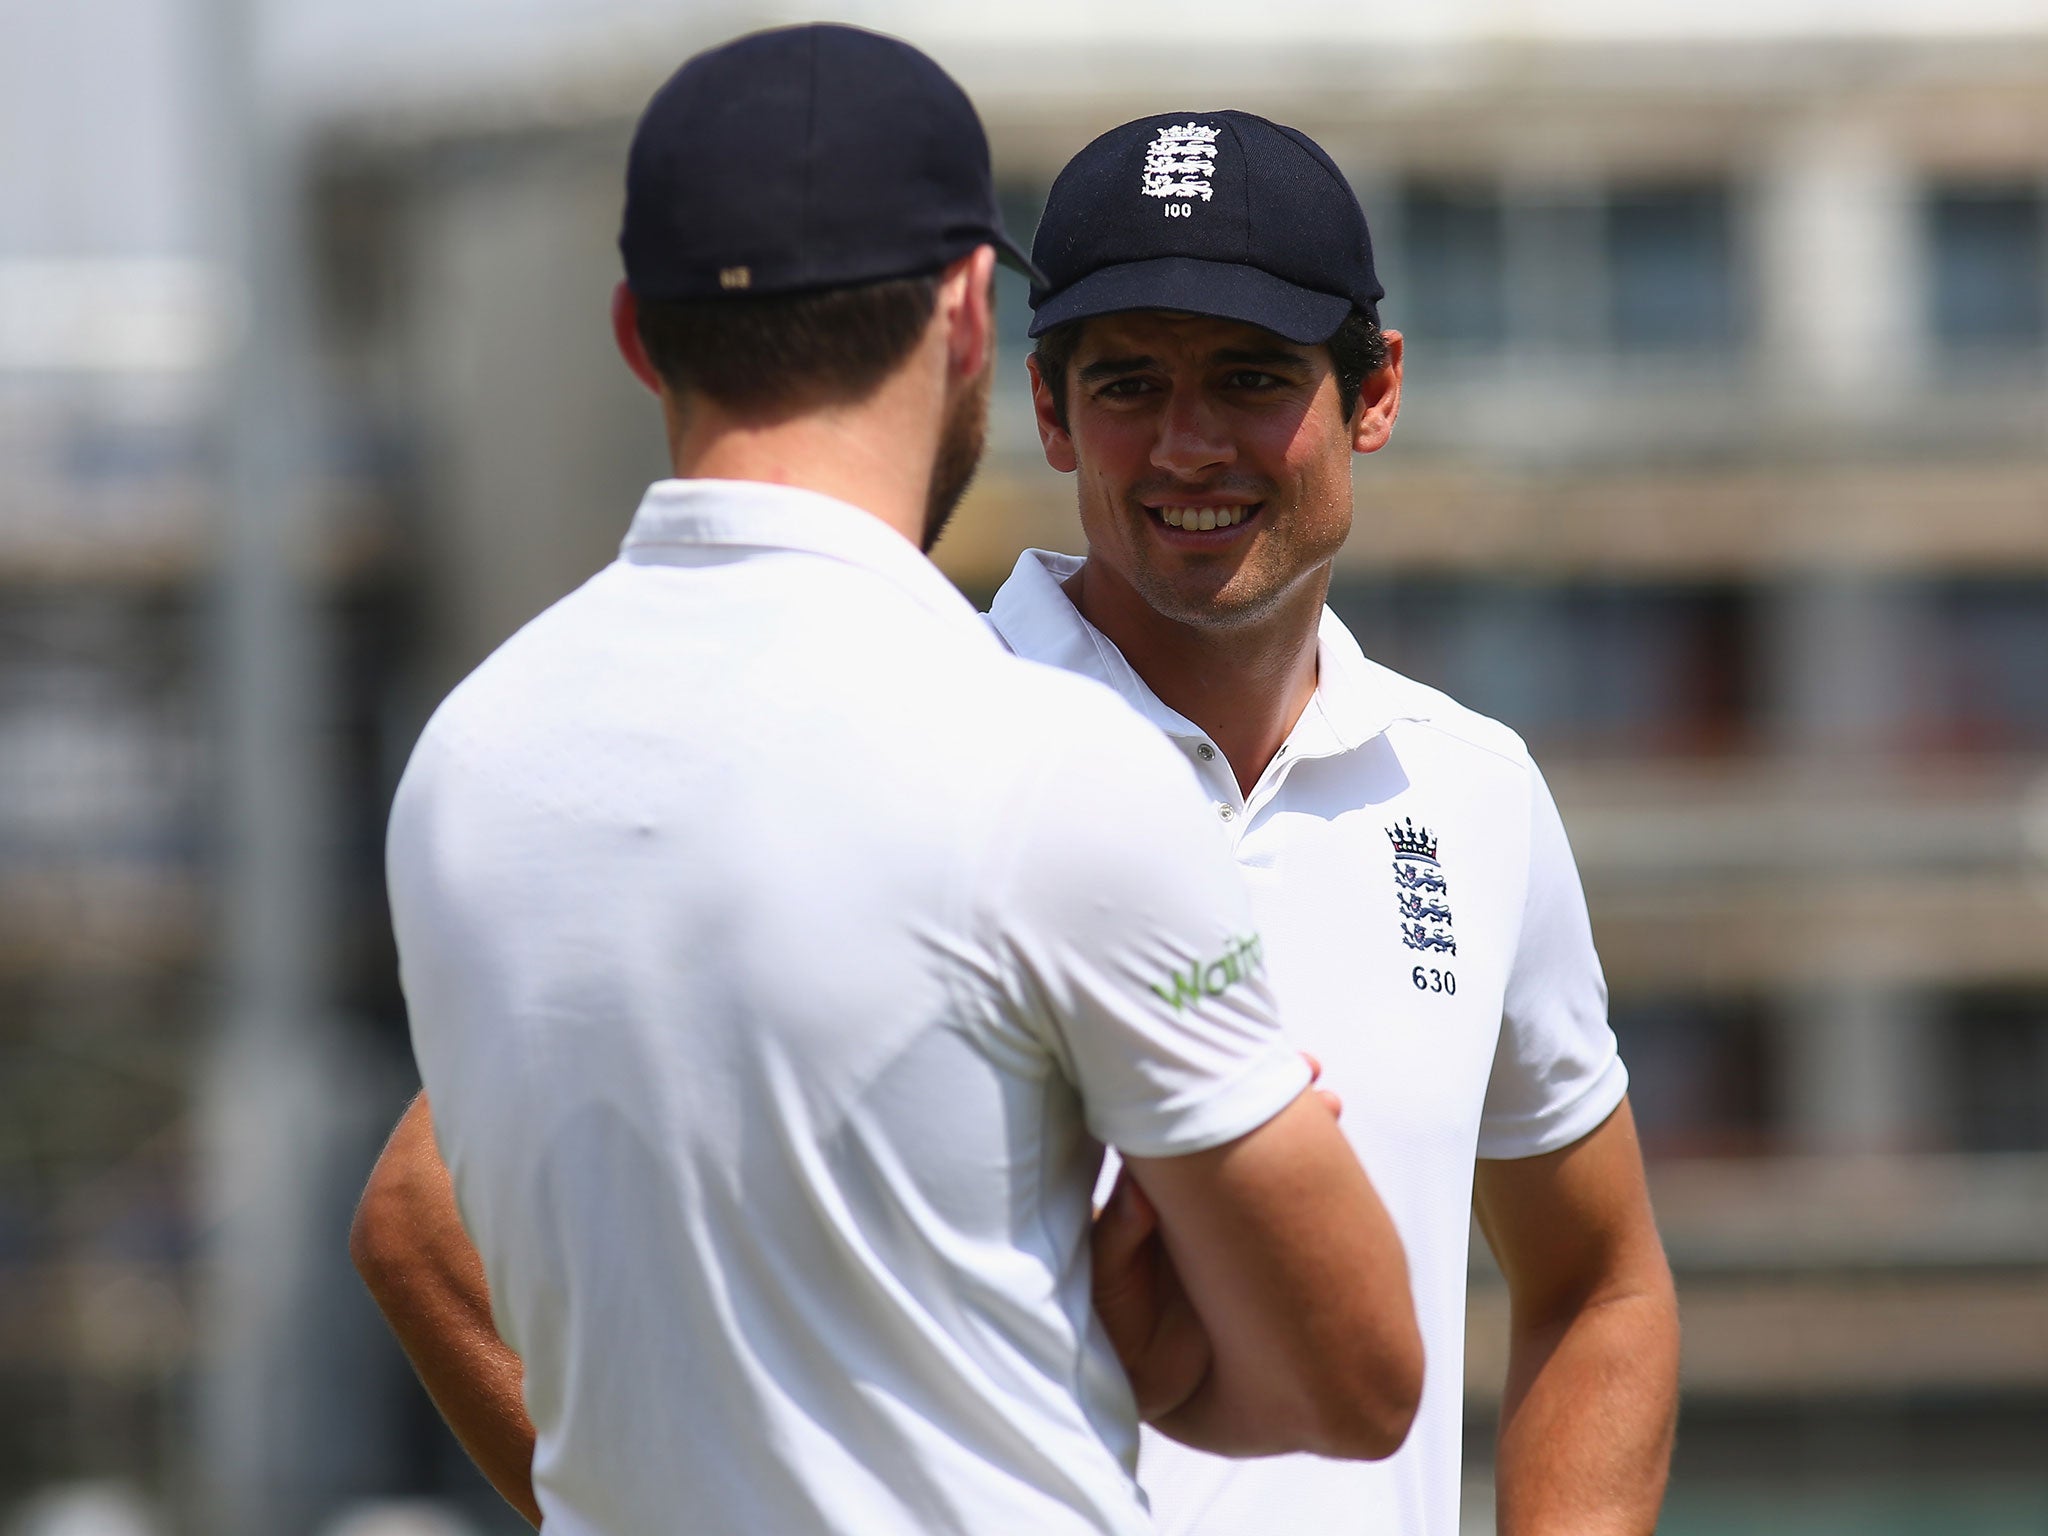 Alastair Cook and Jimmy Anderson speak on the field